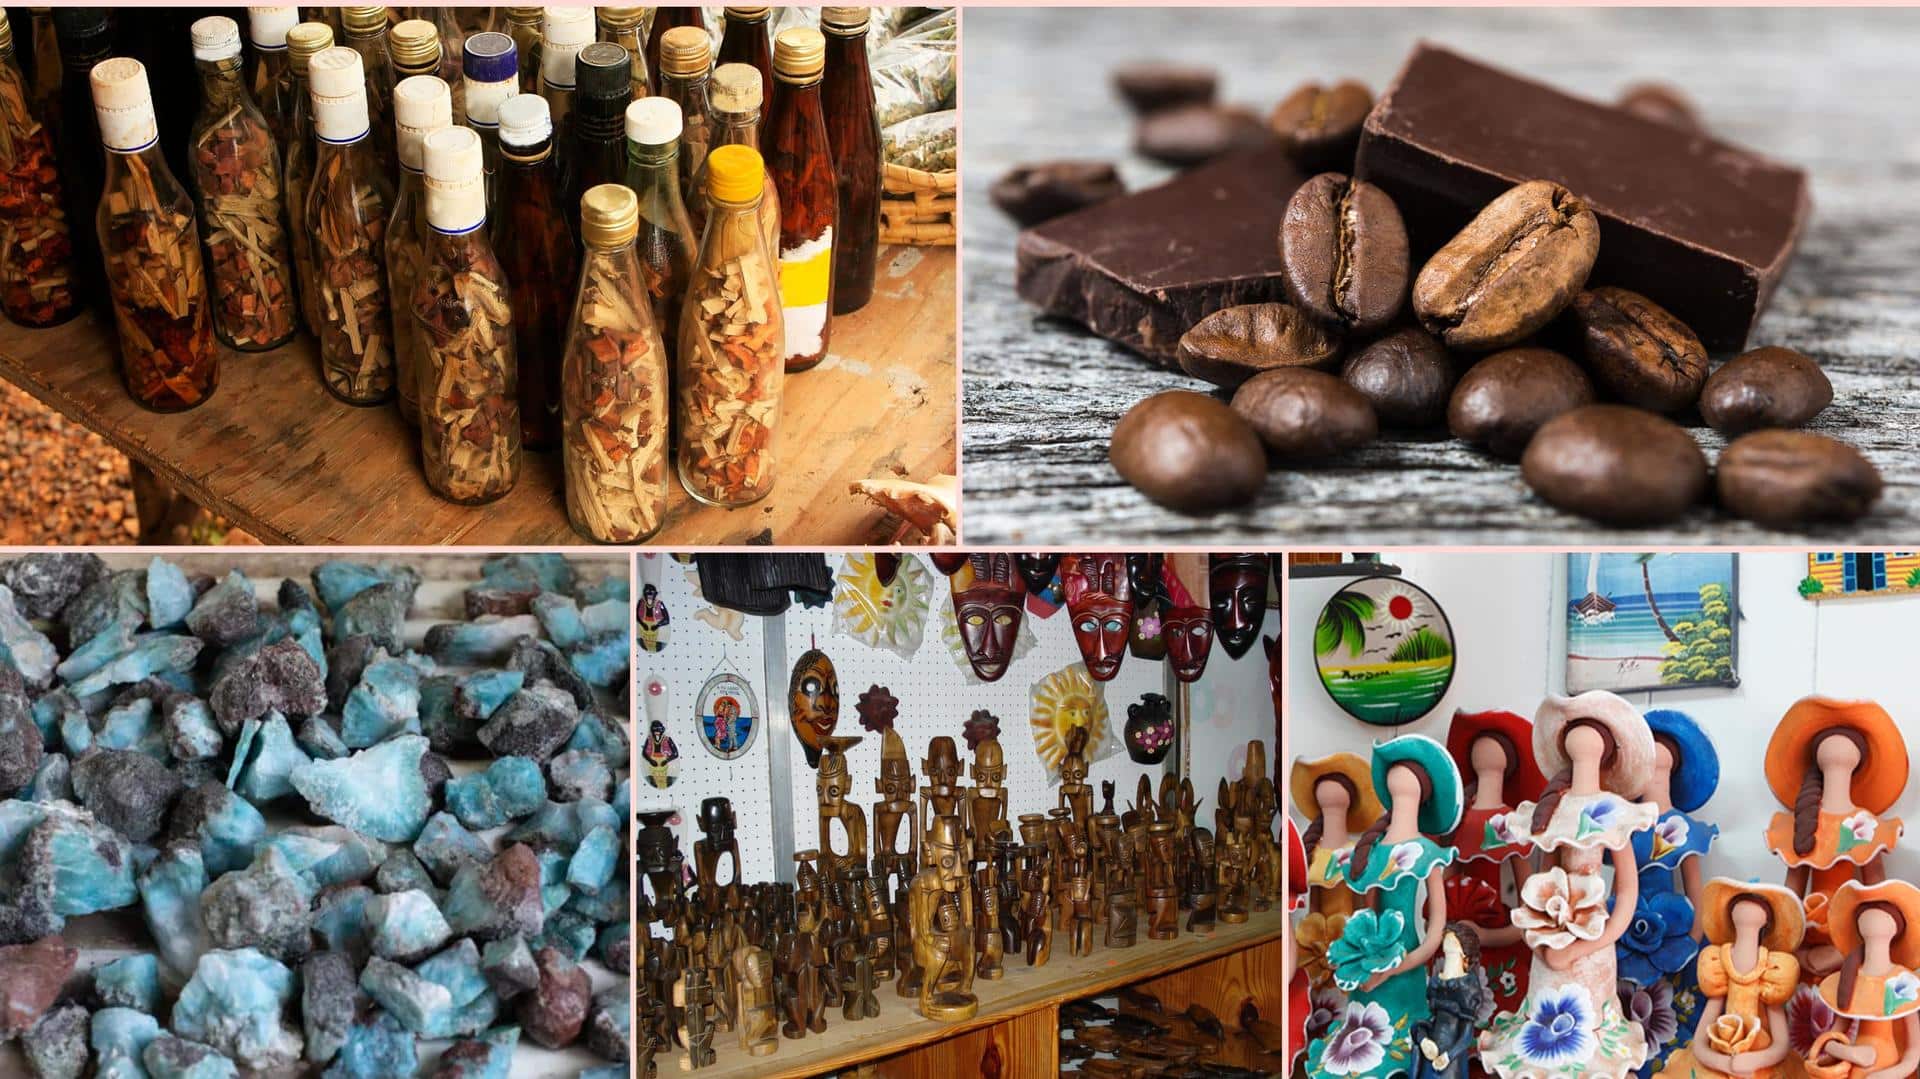 Traveling to the Dominican Republic? Buy these souvenirs back home